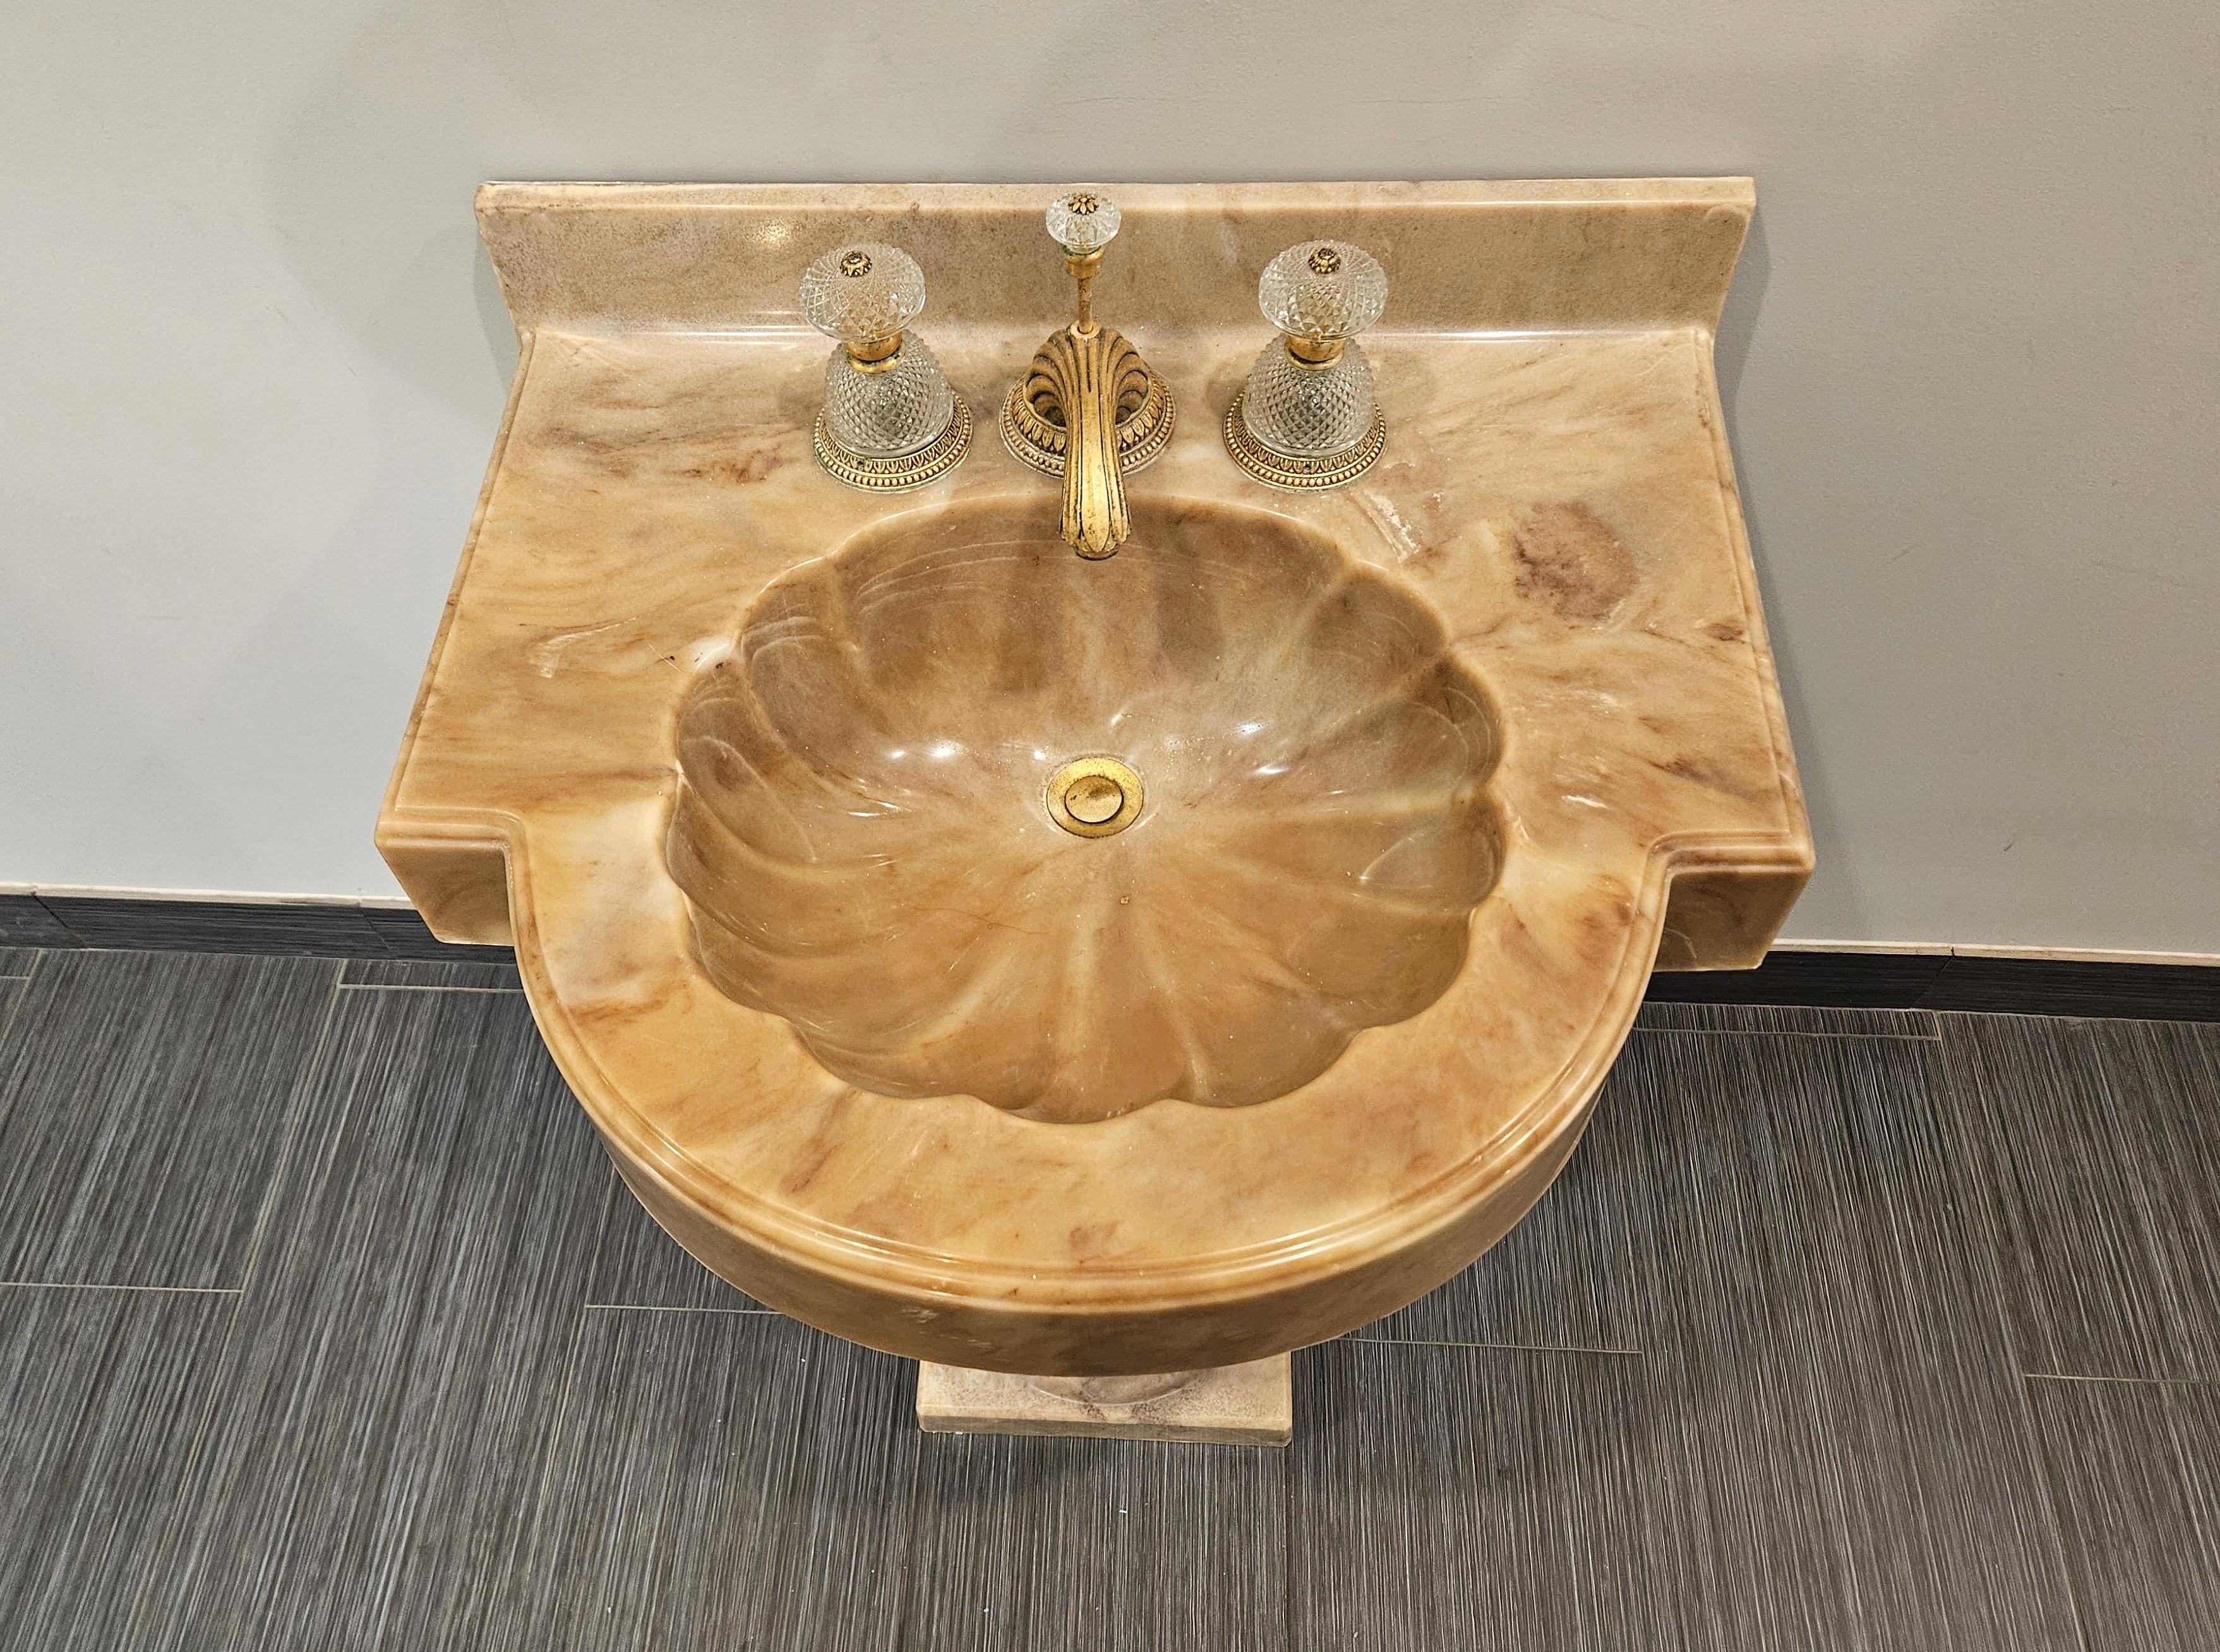 Sherle Wagner Onyx Pedestal Sink.  Sherle Wagner International has been the premier world-wide source for luxury hardware and bath accessories since its founding in 1945.  Currently operated by the family's third generation!  Mr Wagner elevated